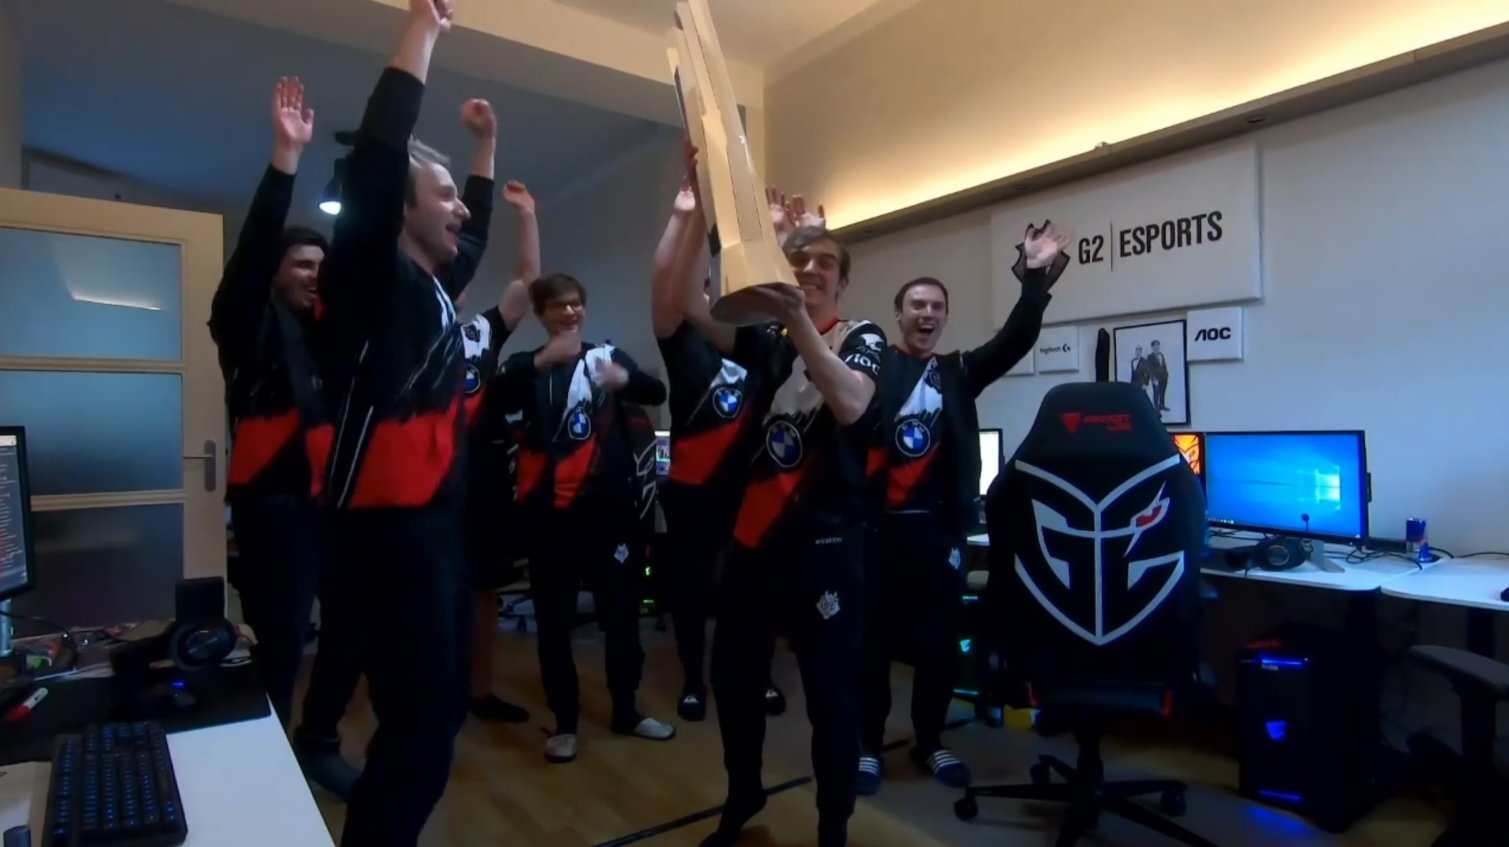 G2 are the LEC 2020 Spring Champions, defeating Fnatic